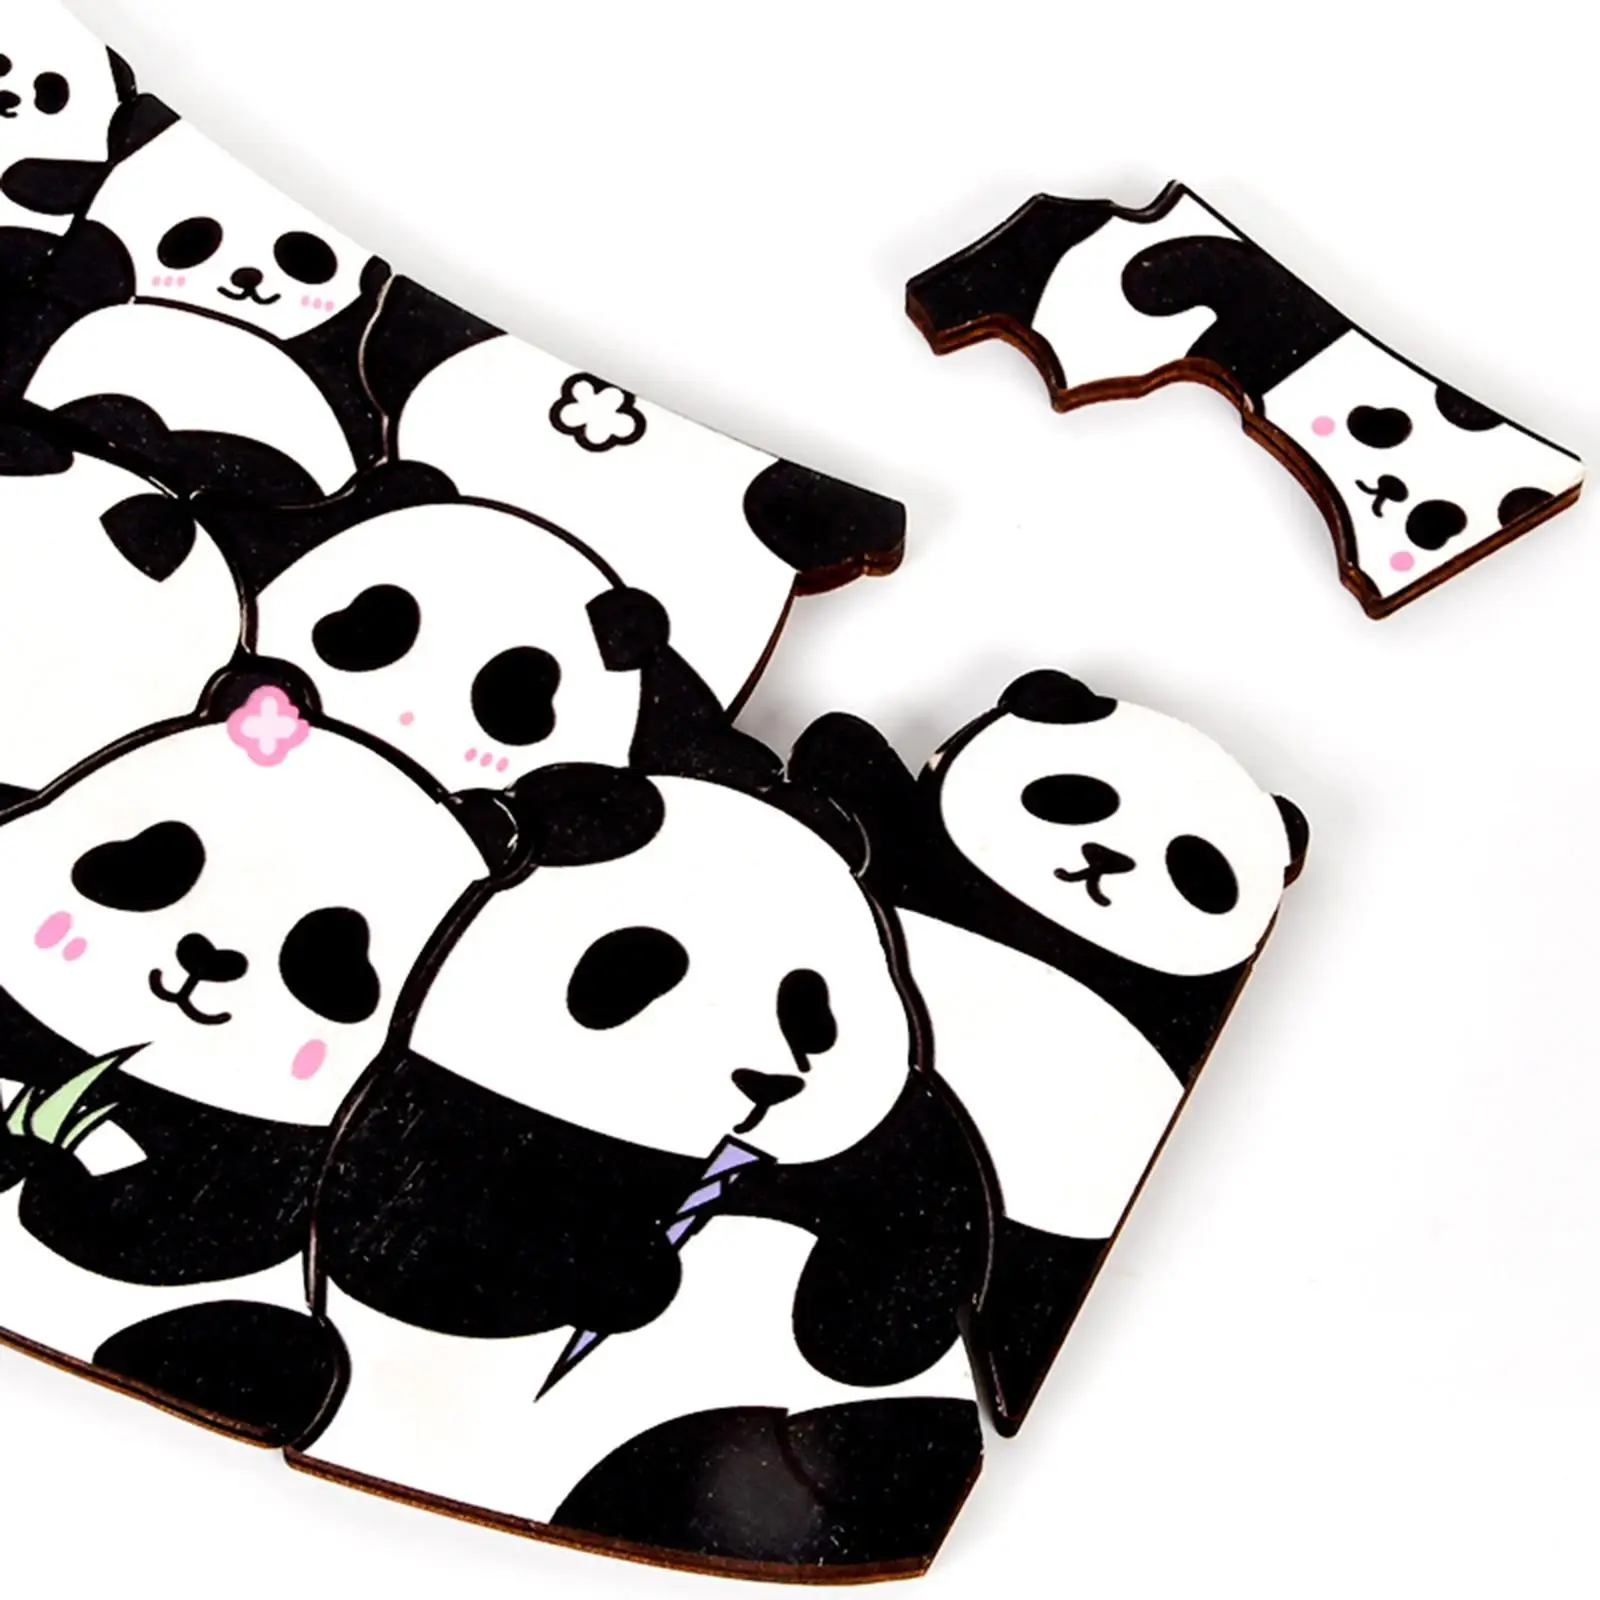 

Panda Jigsaw Puzzles Fine Motor Skill Wooden Ages 4 Year Old and Up Matching Game Canned Interactive Animal Jigsaw Puzzle